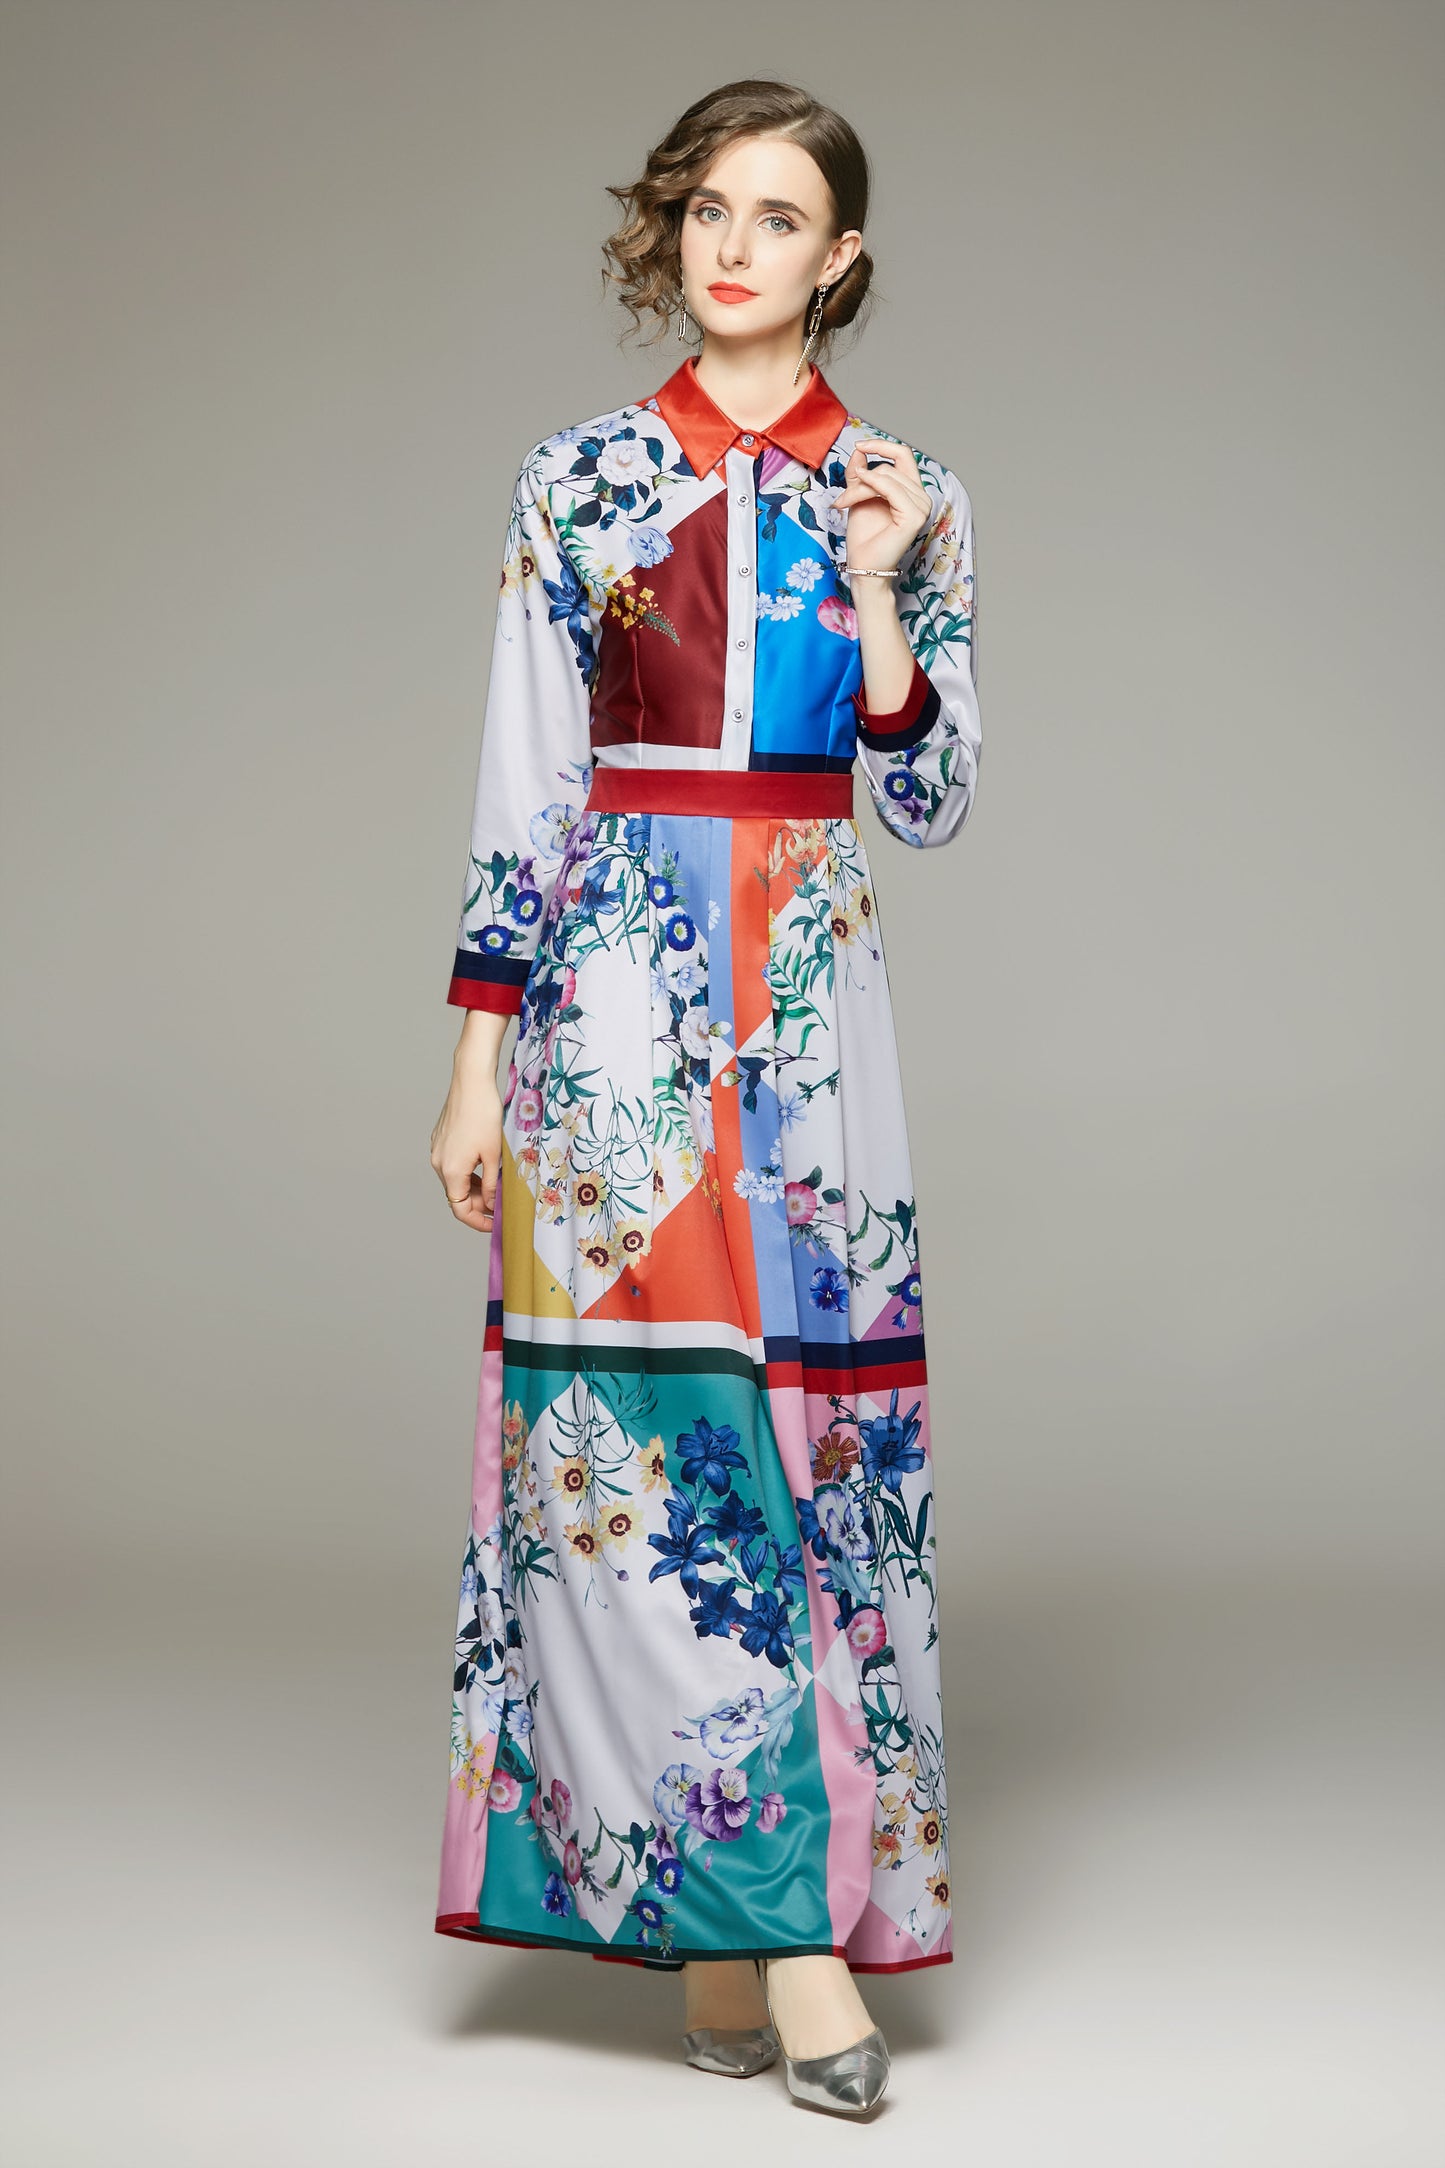 Long Sleeves Collared neckline Floral Print Maxi Dress